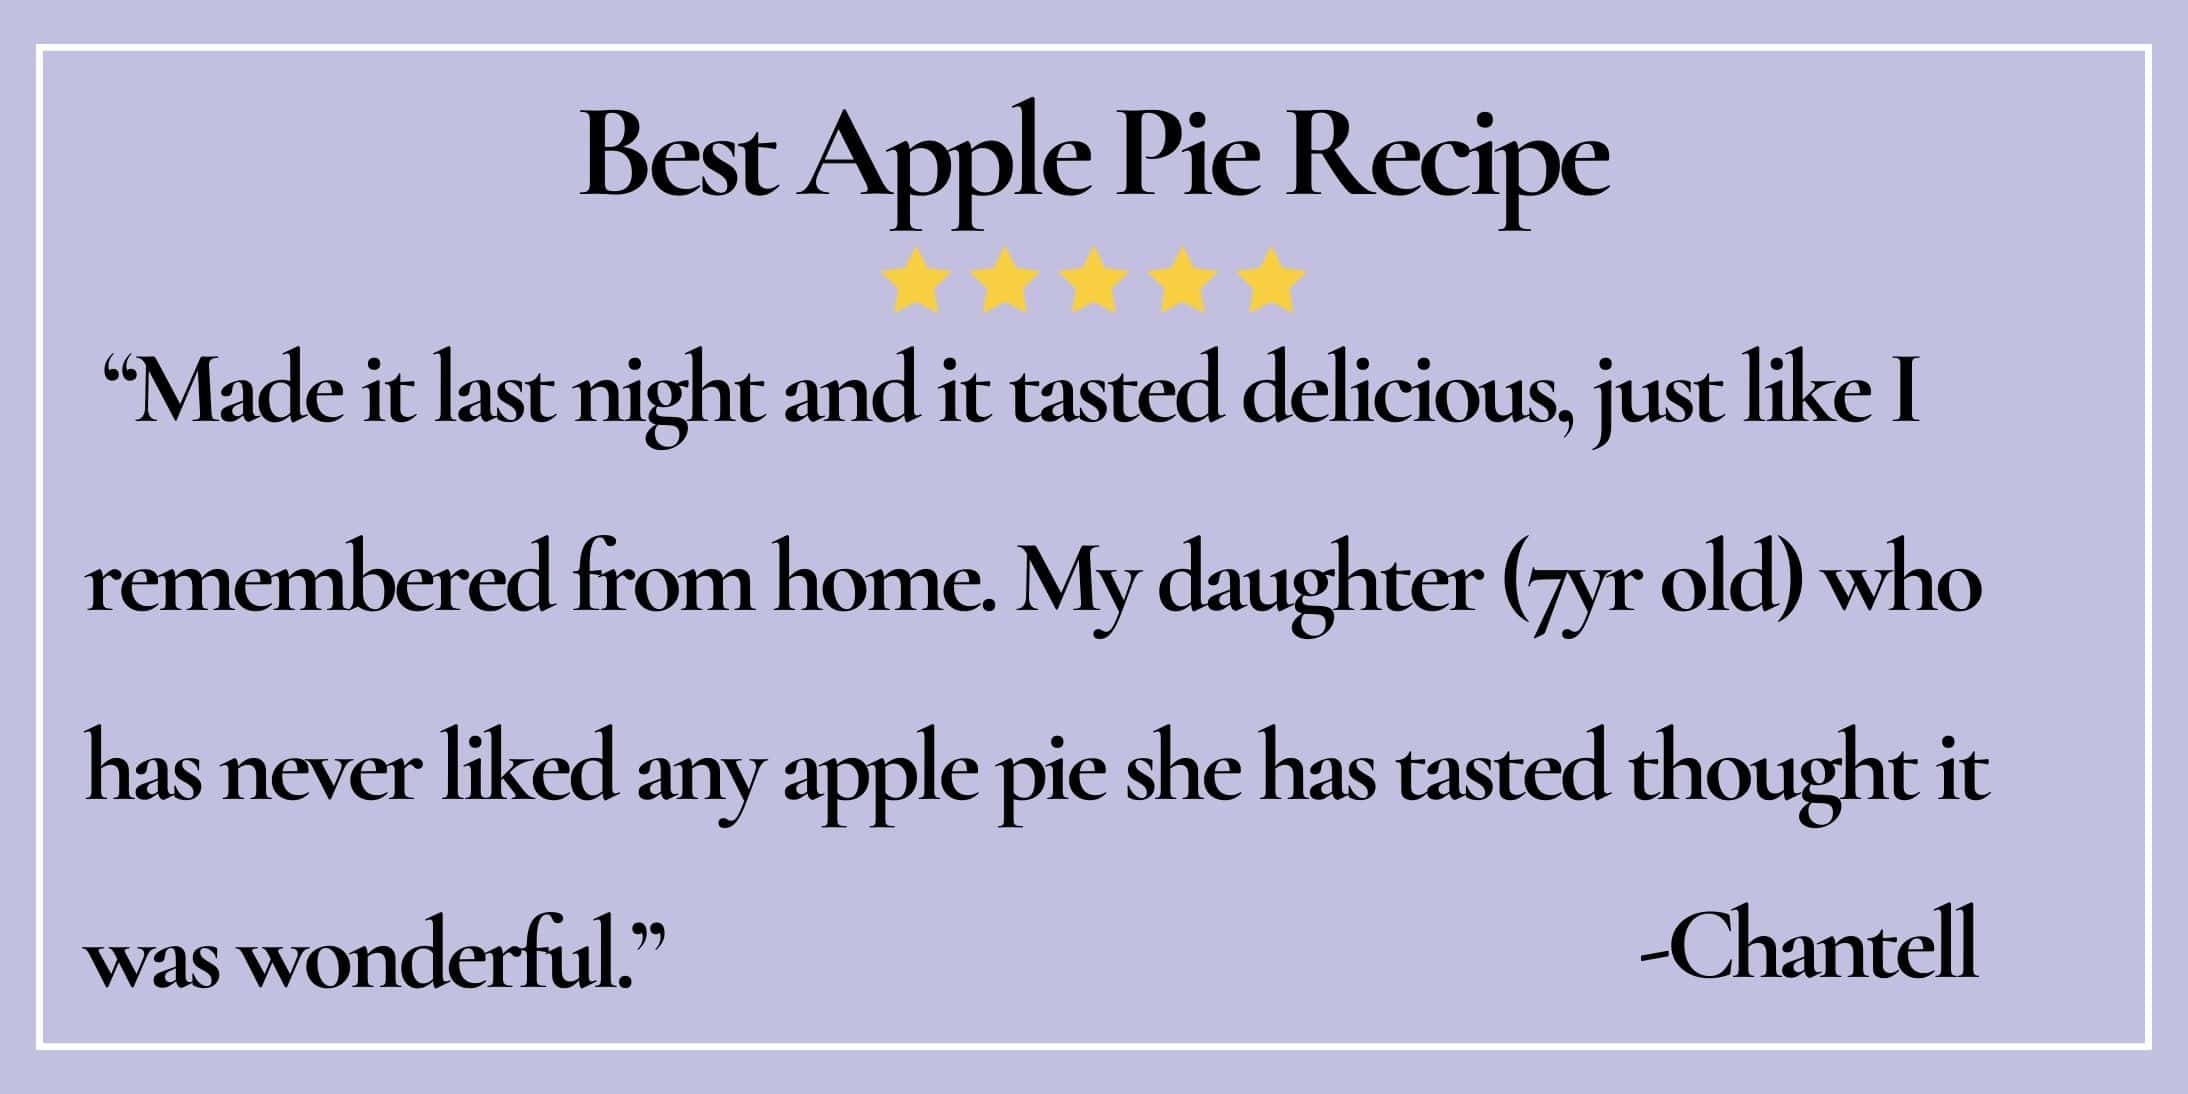 text box with paraphrase: My daughter who has never liked any apple pie she has tasted thought it was wonderful.-Chantell